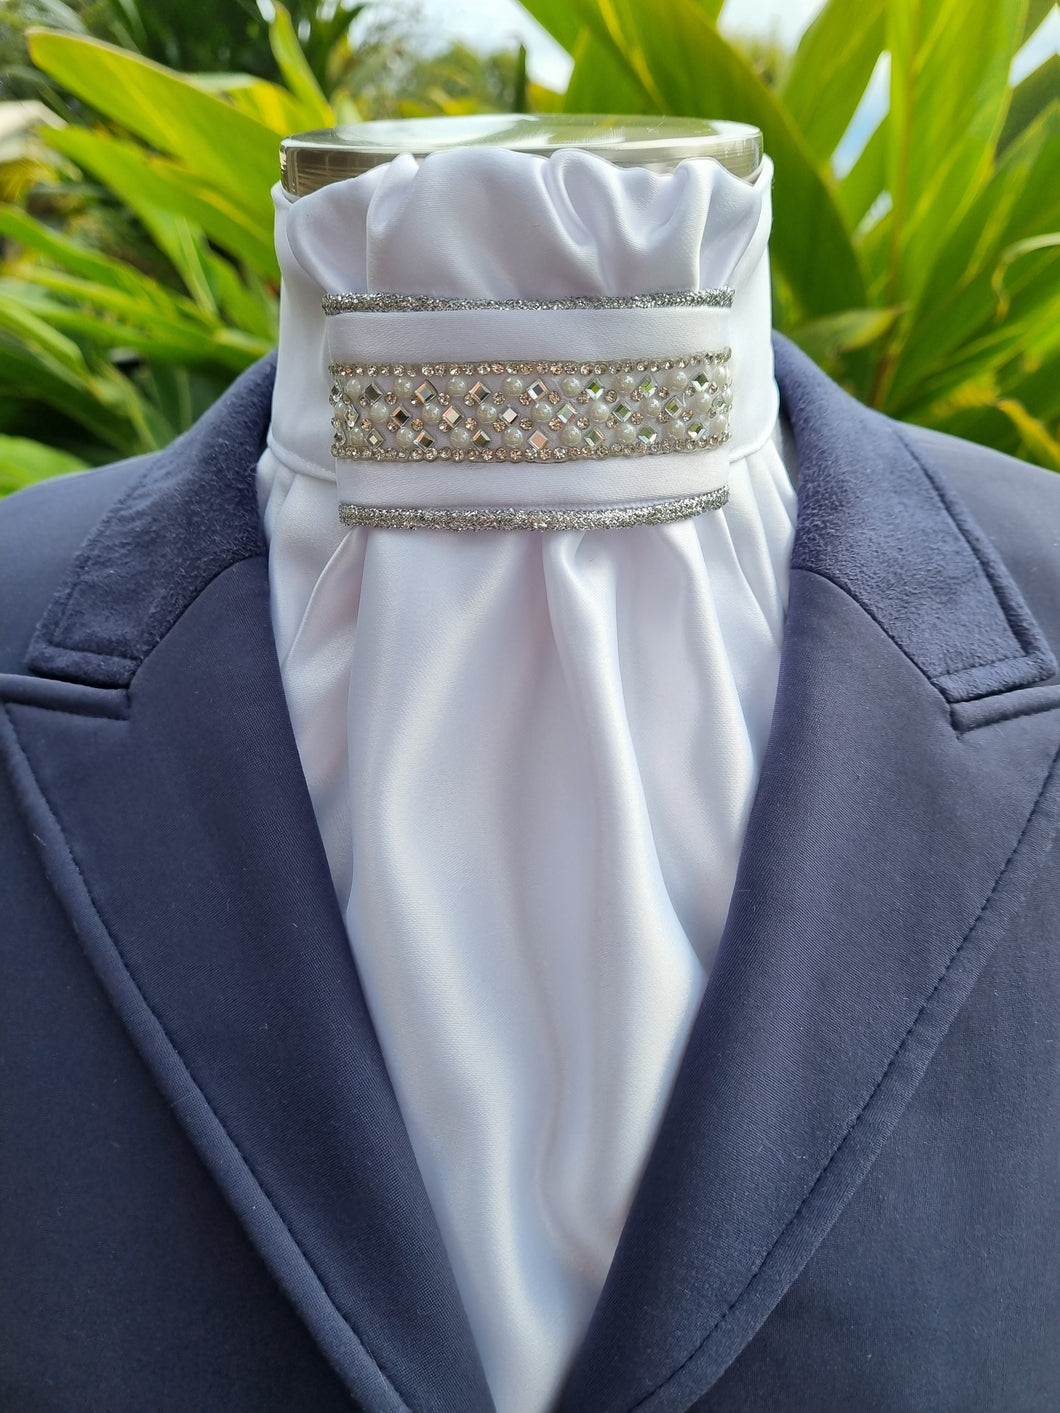 ERA EURO REGAL STOCK TIE - White satin, silver piping, crystal and pearl trim